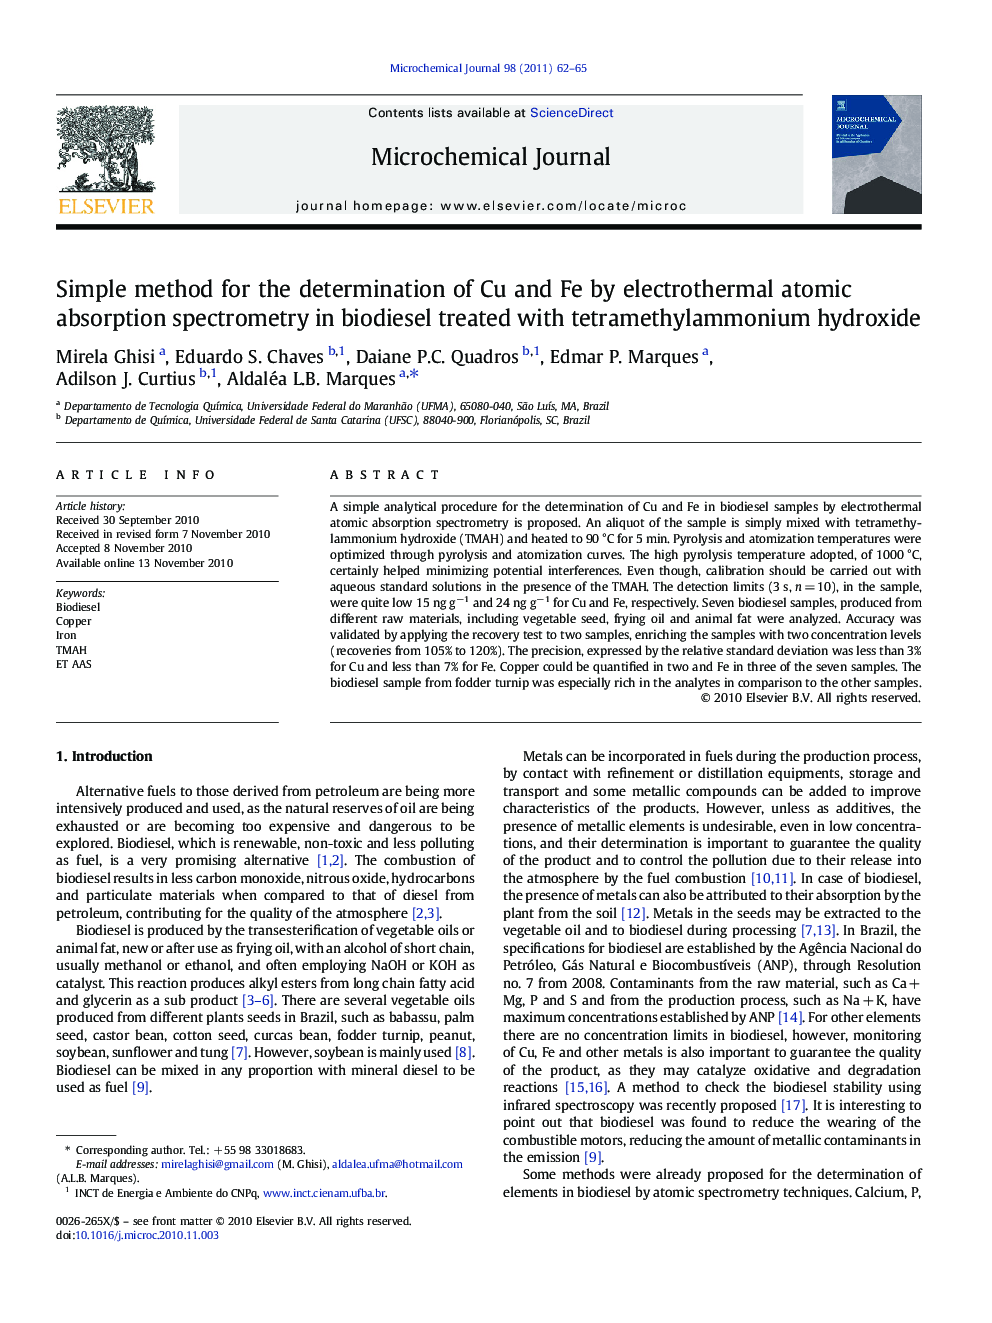 Simple method for the determination of Cu and Fe by electrothermal atomic absorption spectrometry in biodiesel treated with tetramethylammonium hydroxide